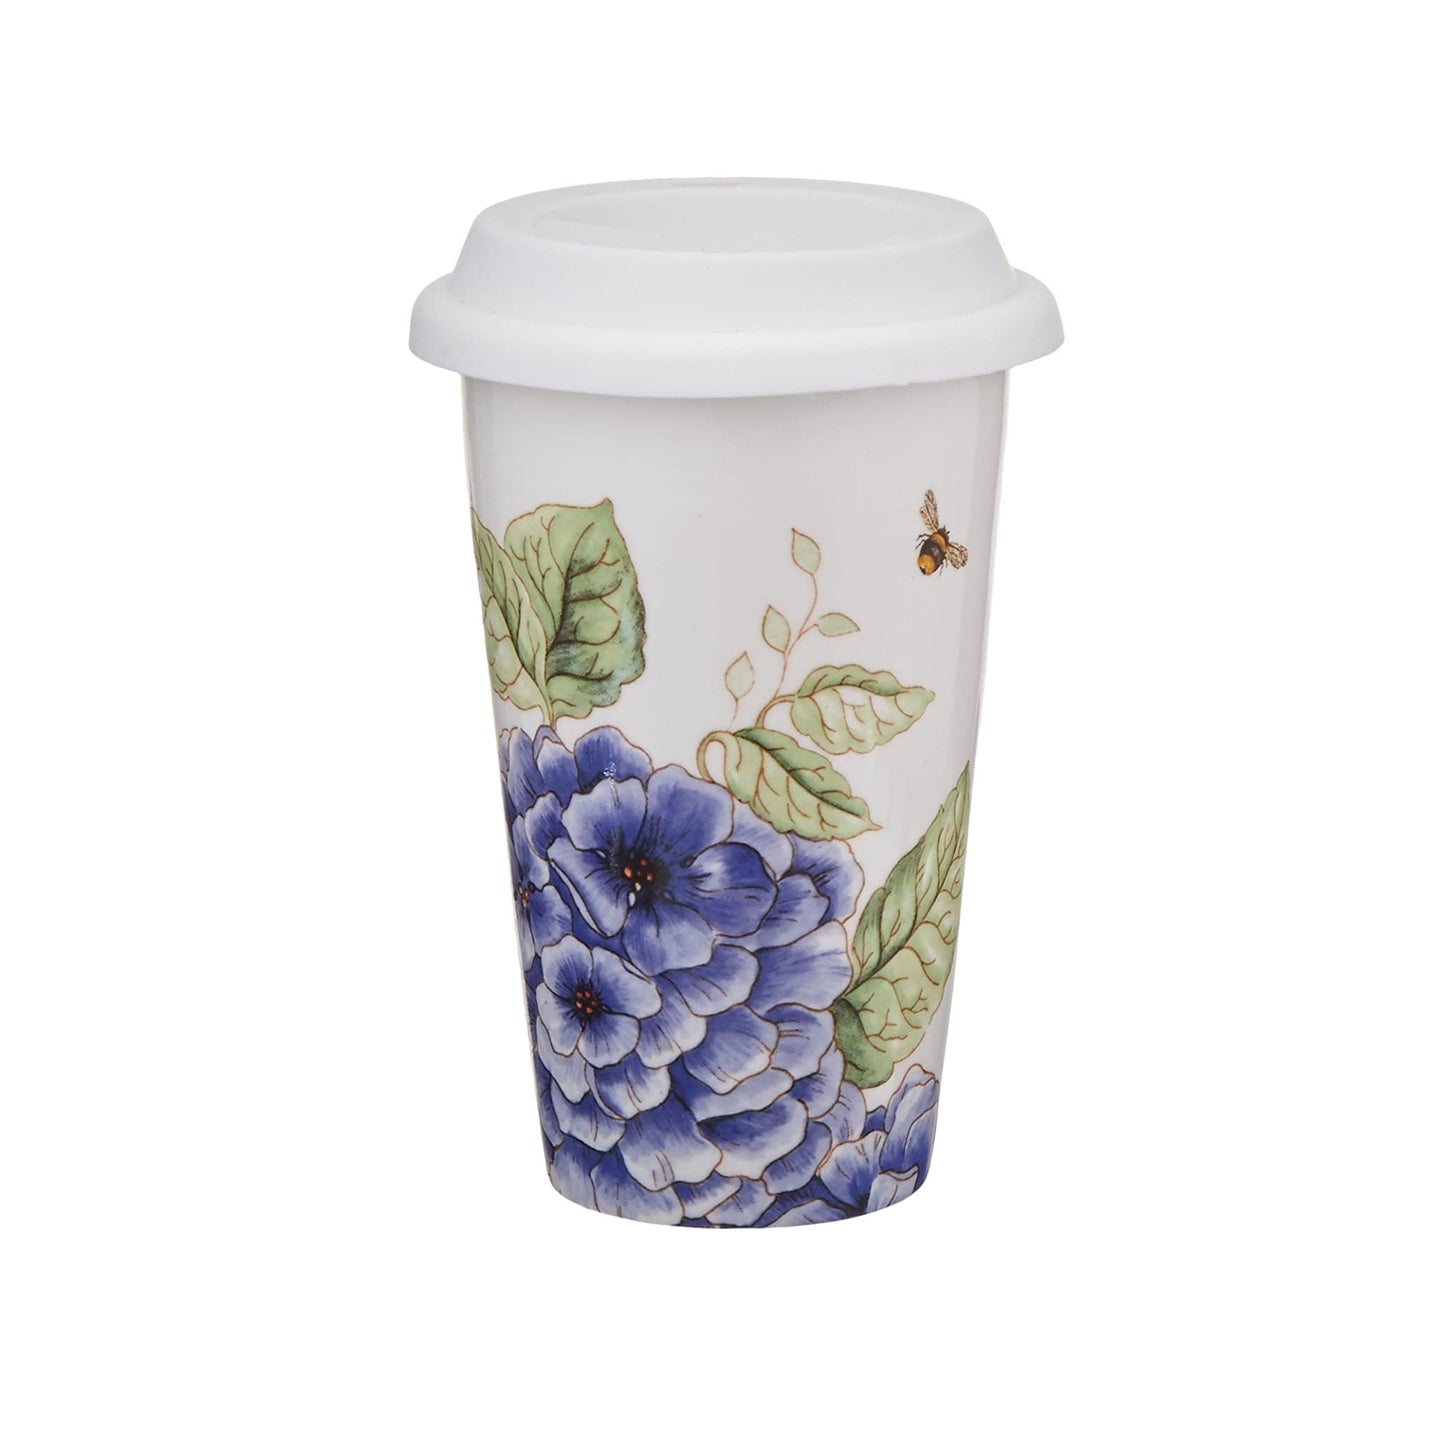 Butterfly Meadow Blue Thermal Travel Mug by Lenox